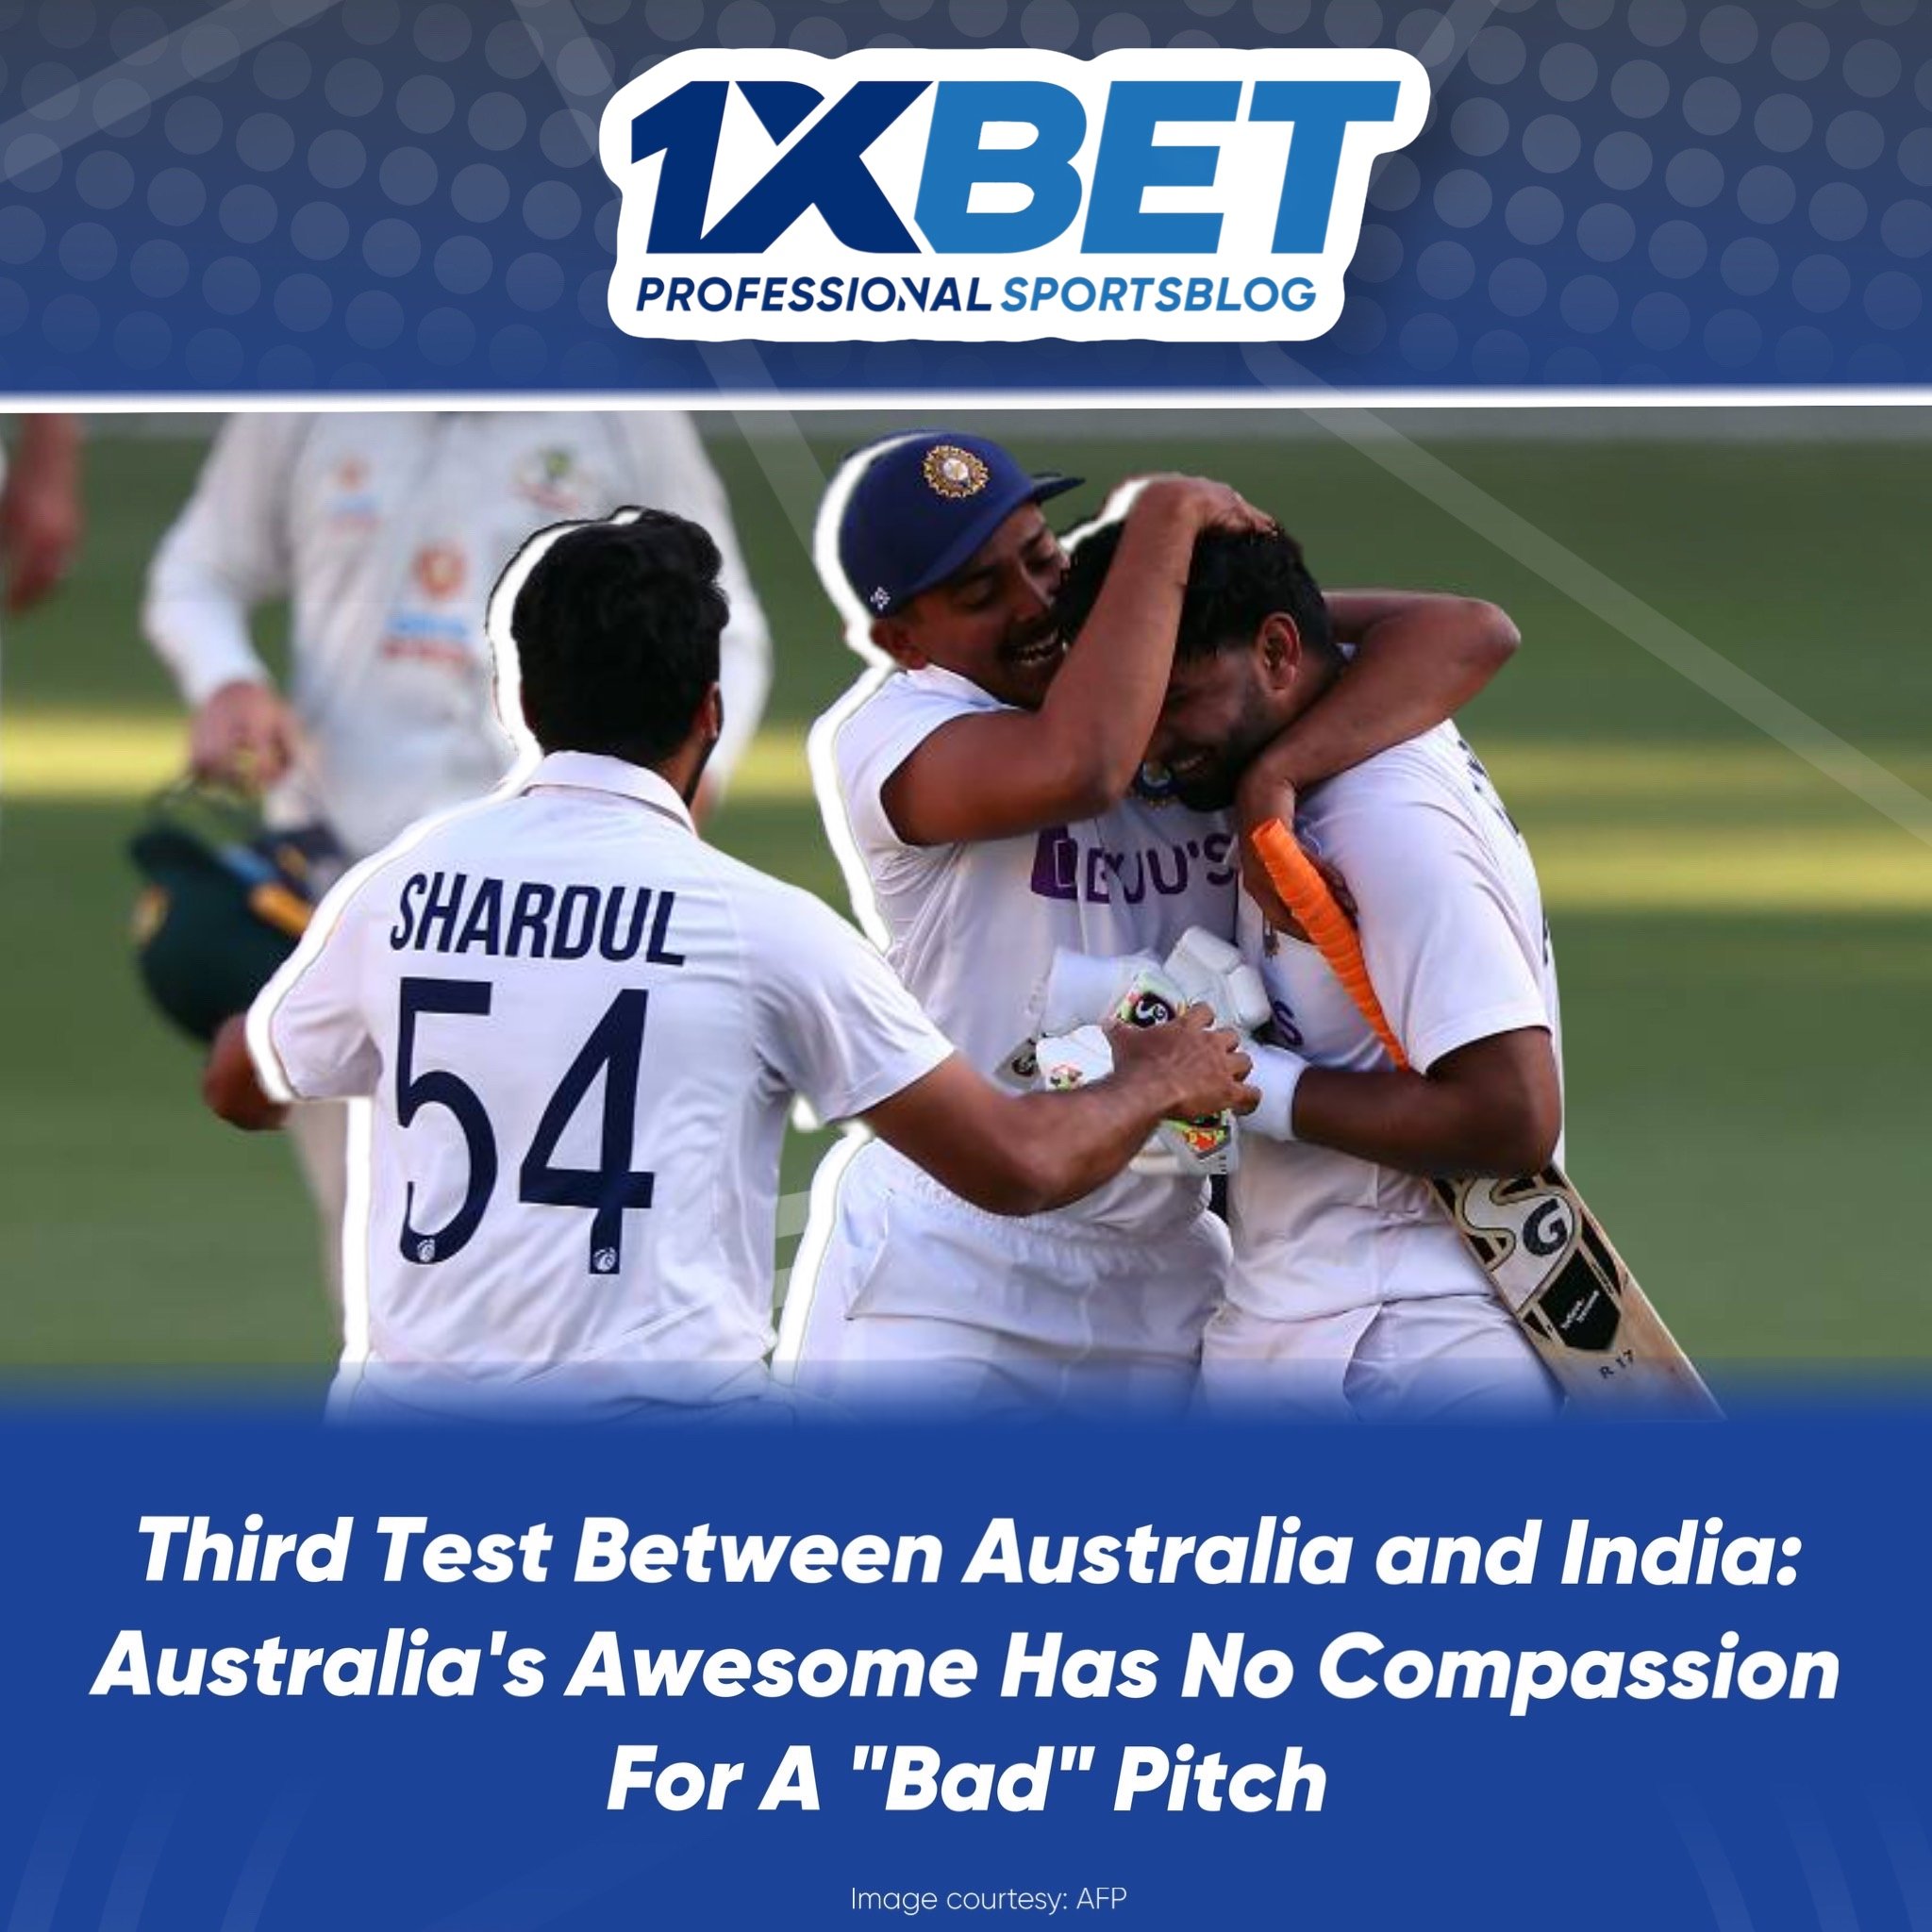 Third Test Between Australia and India: Australia's Awesome Has No Compassion For A "Bad" Pitch